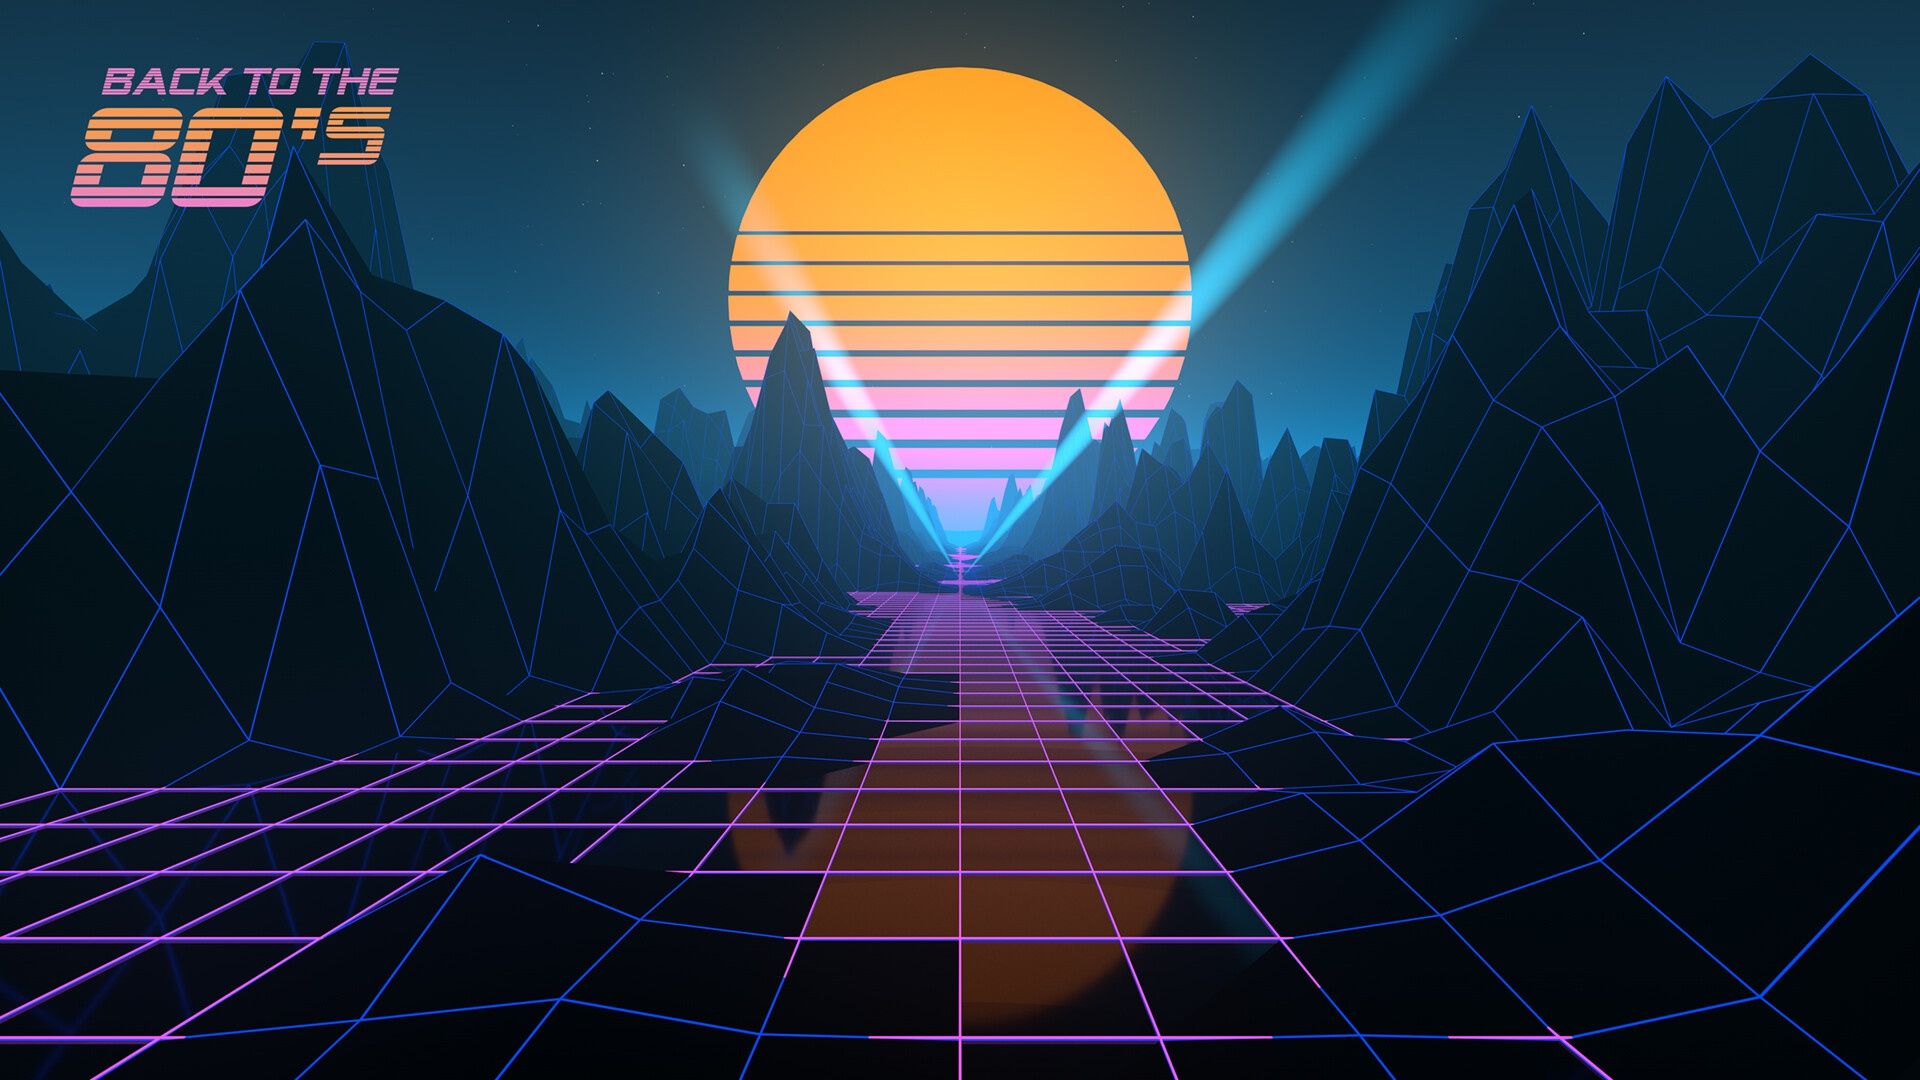 Back to the 80's, RetroWave [1920x1080]